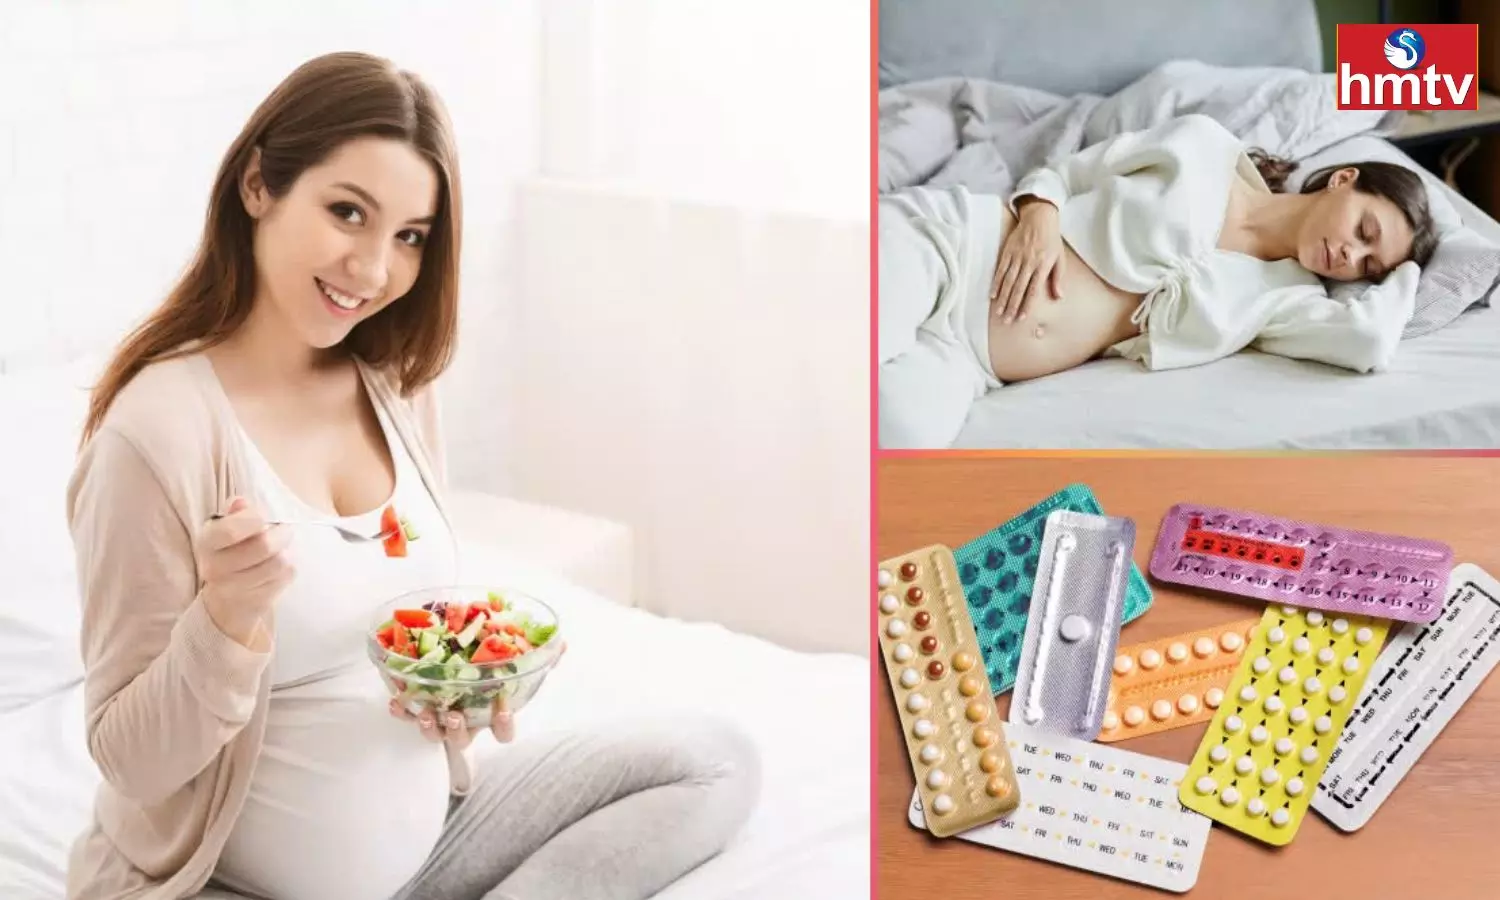 Are You Using Contraceptive Pills Without Doctors Advice